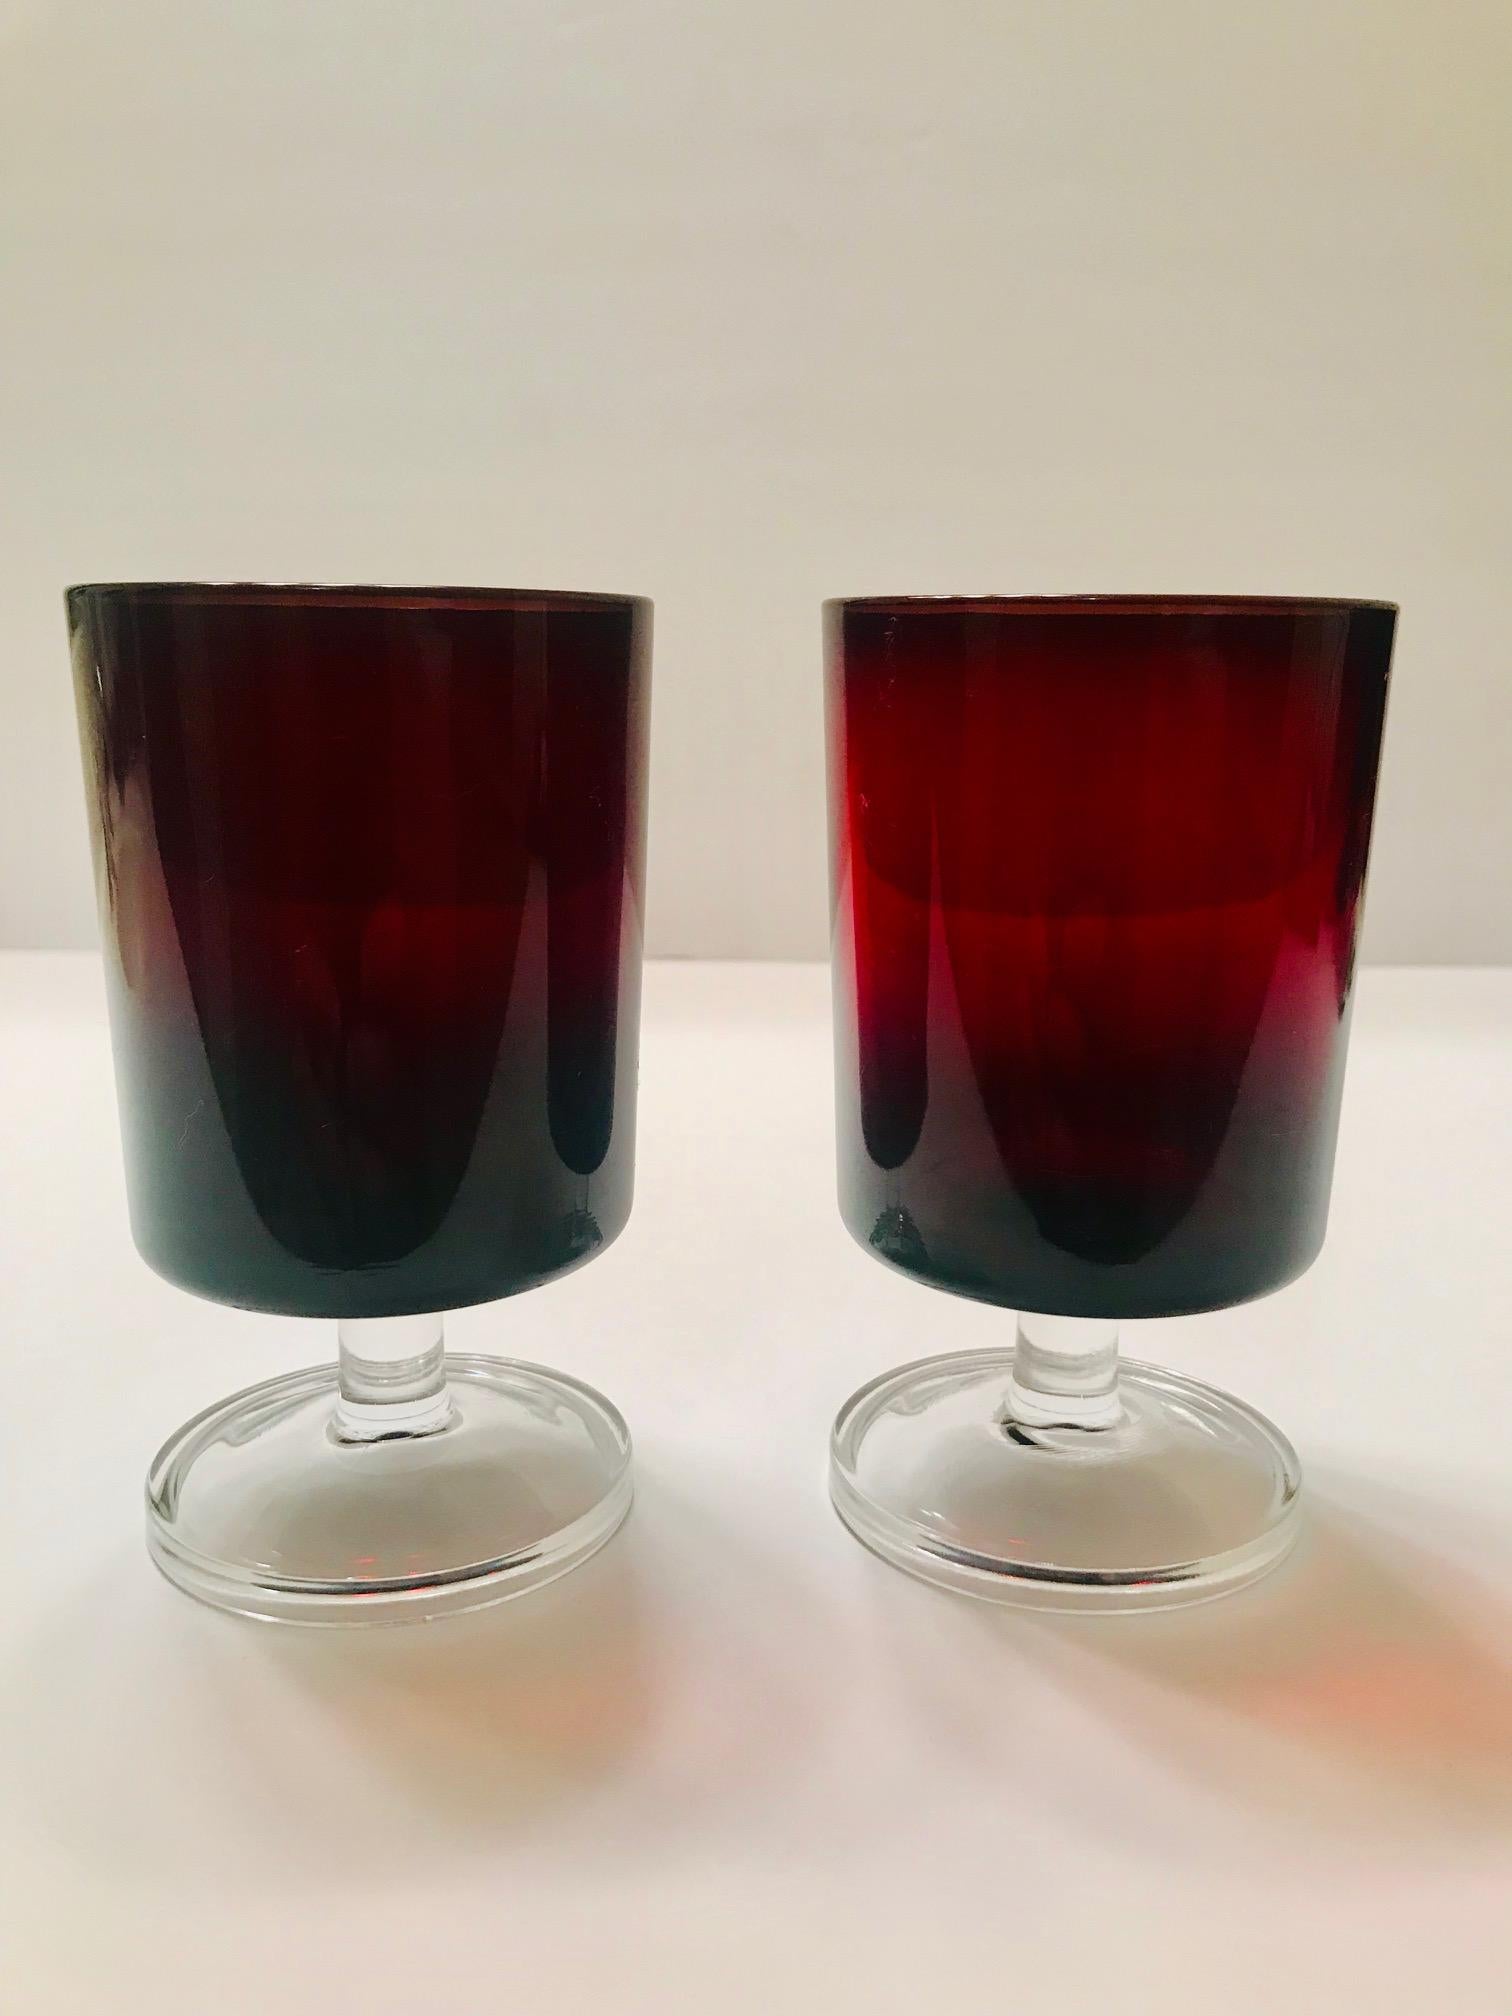 Set of 8 Mid-Century Modern Red Garnet Wine Goblets by Cristal d'Arques 1